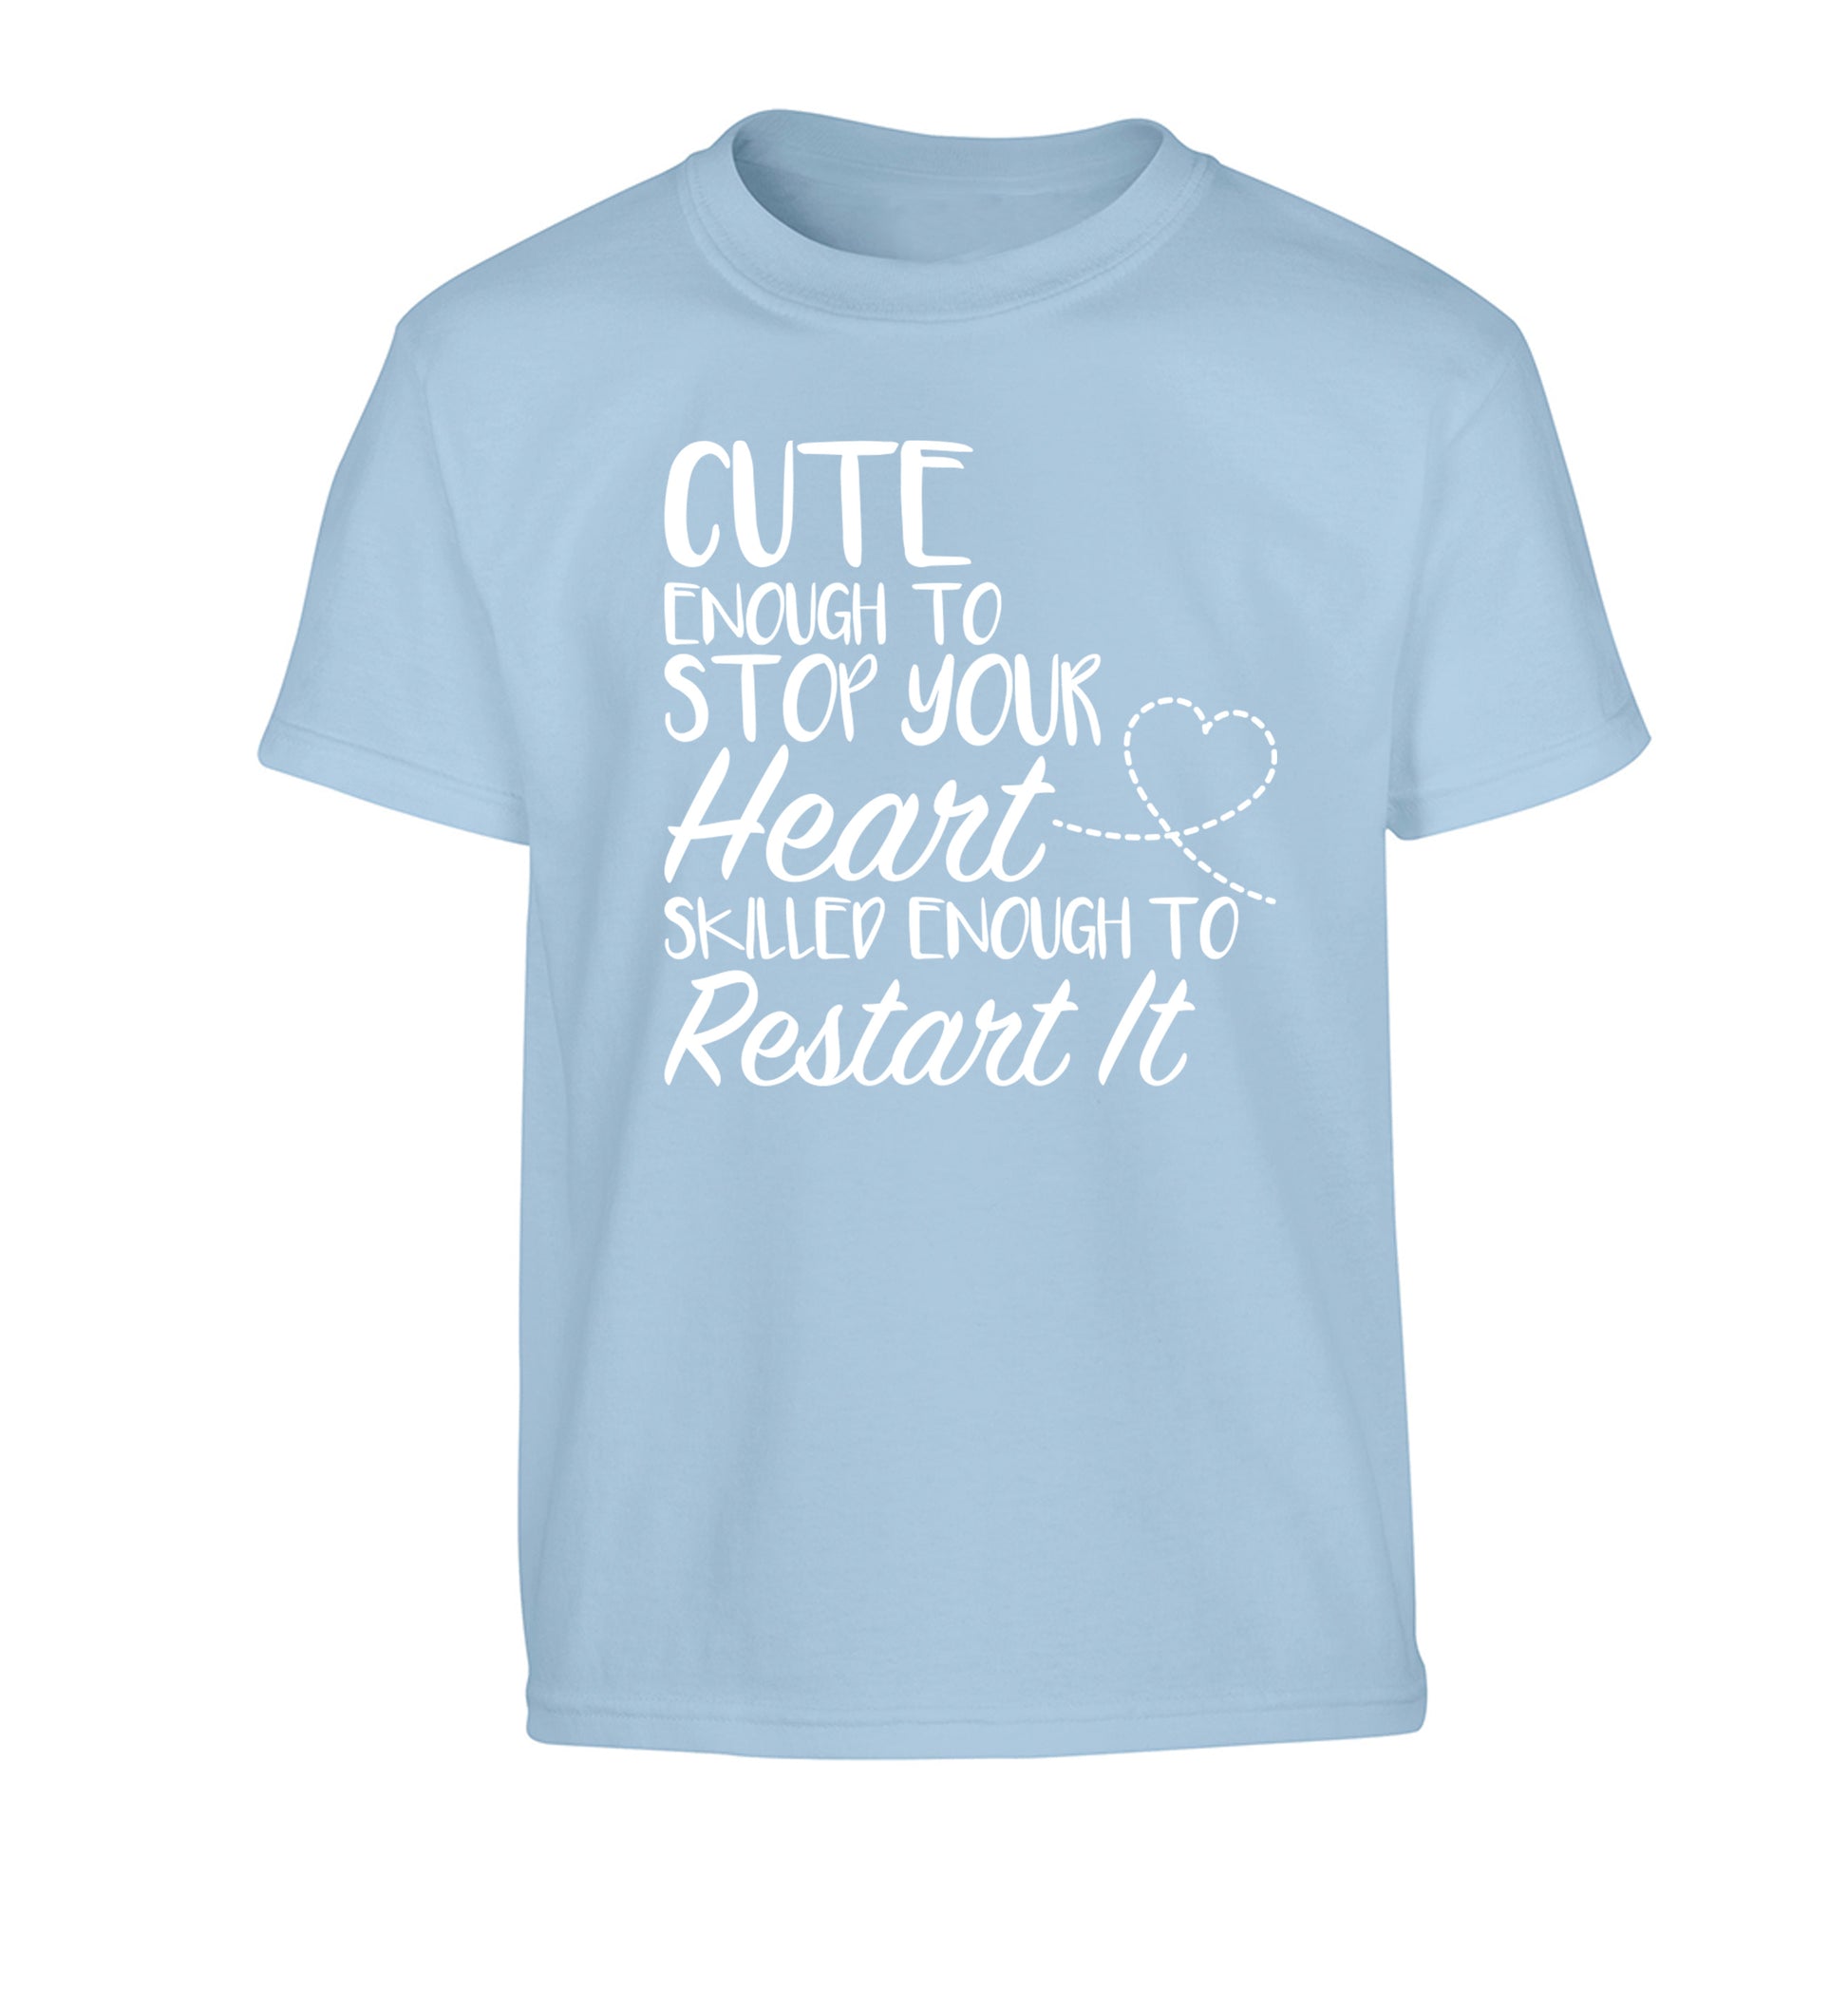 Cute enough to stop your heart skilled enough to restart it Children's light blue Tshirt 12-13 Years